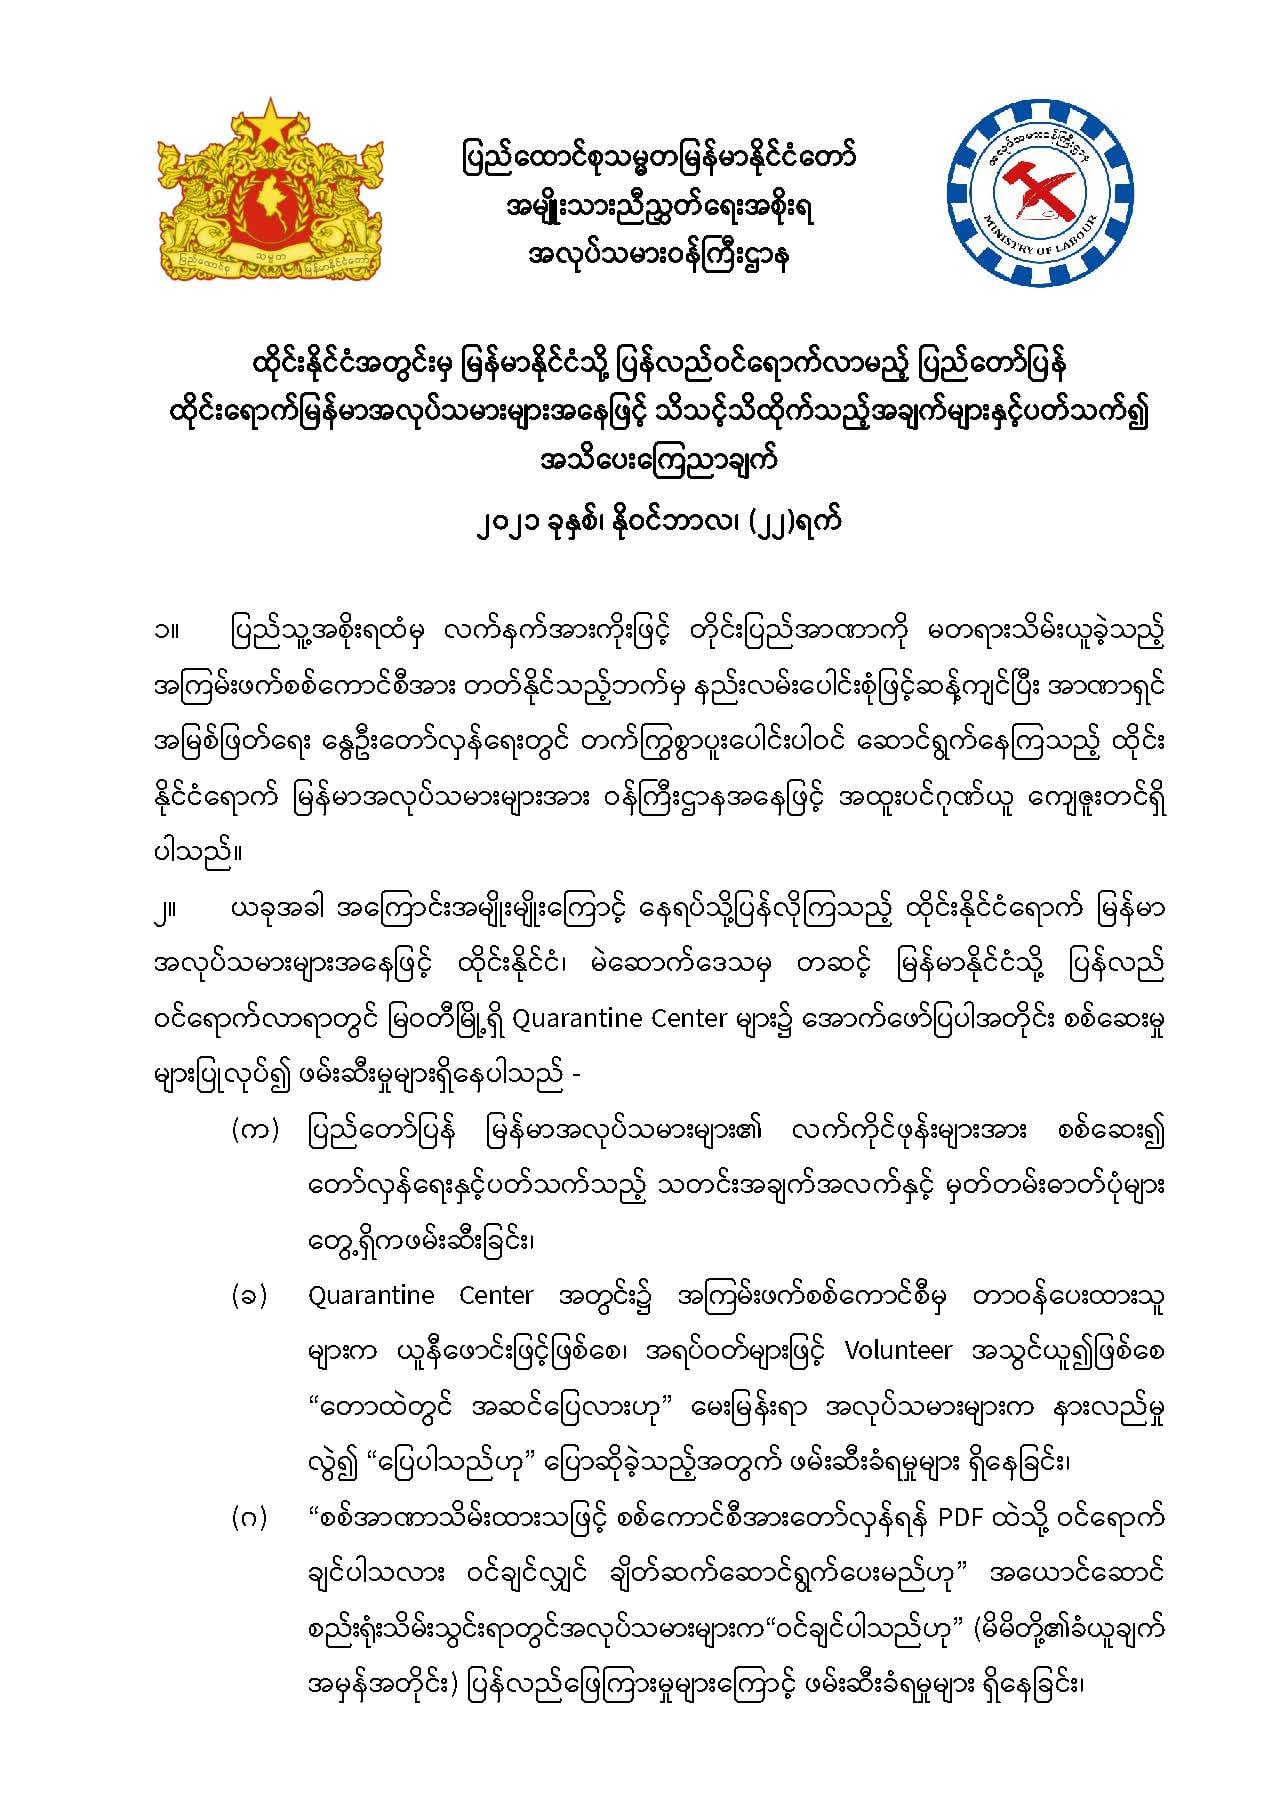 Announcement for returning to Myanmar 1